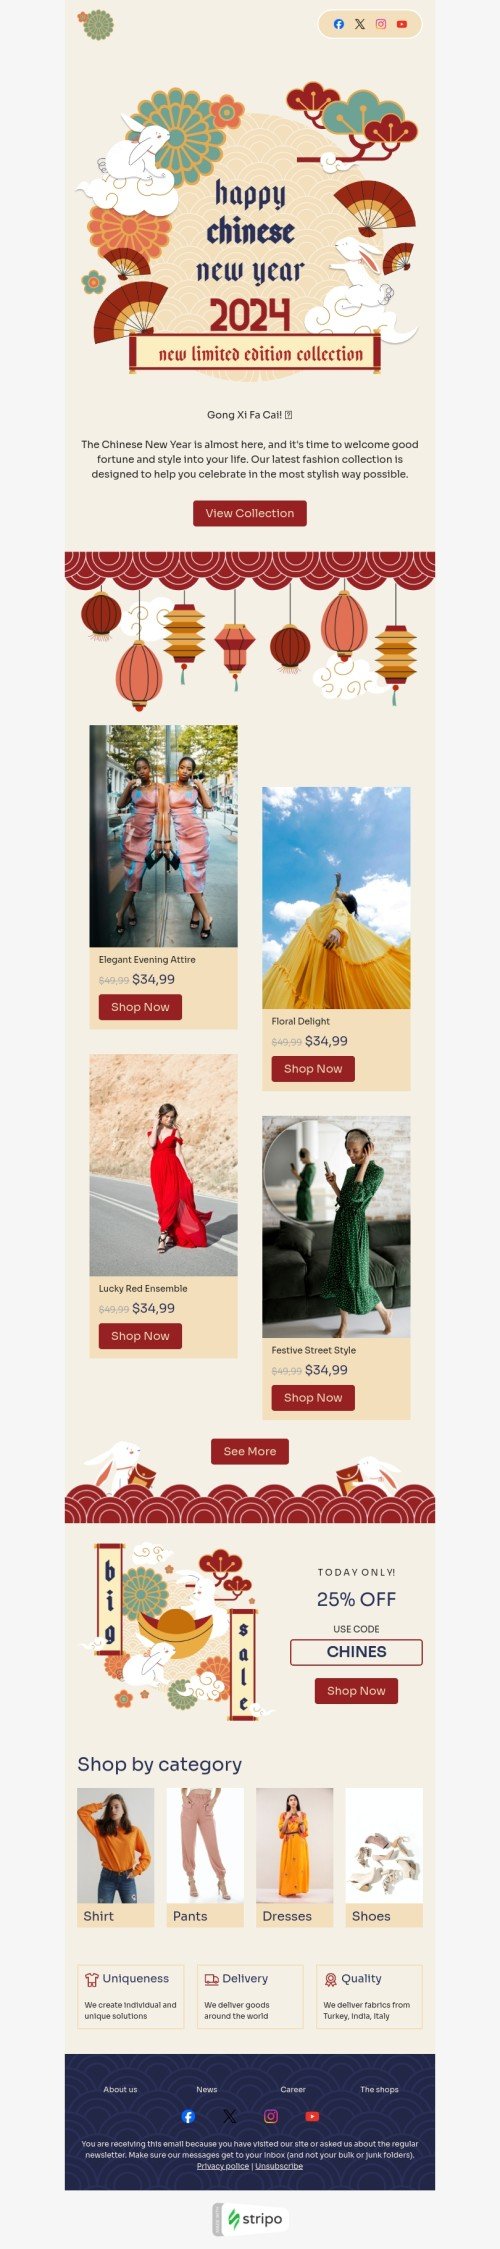 Chinese New Year email template "New limited edition collection" for fashion industry desktop view